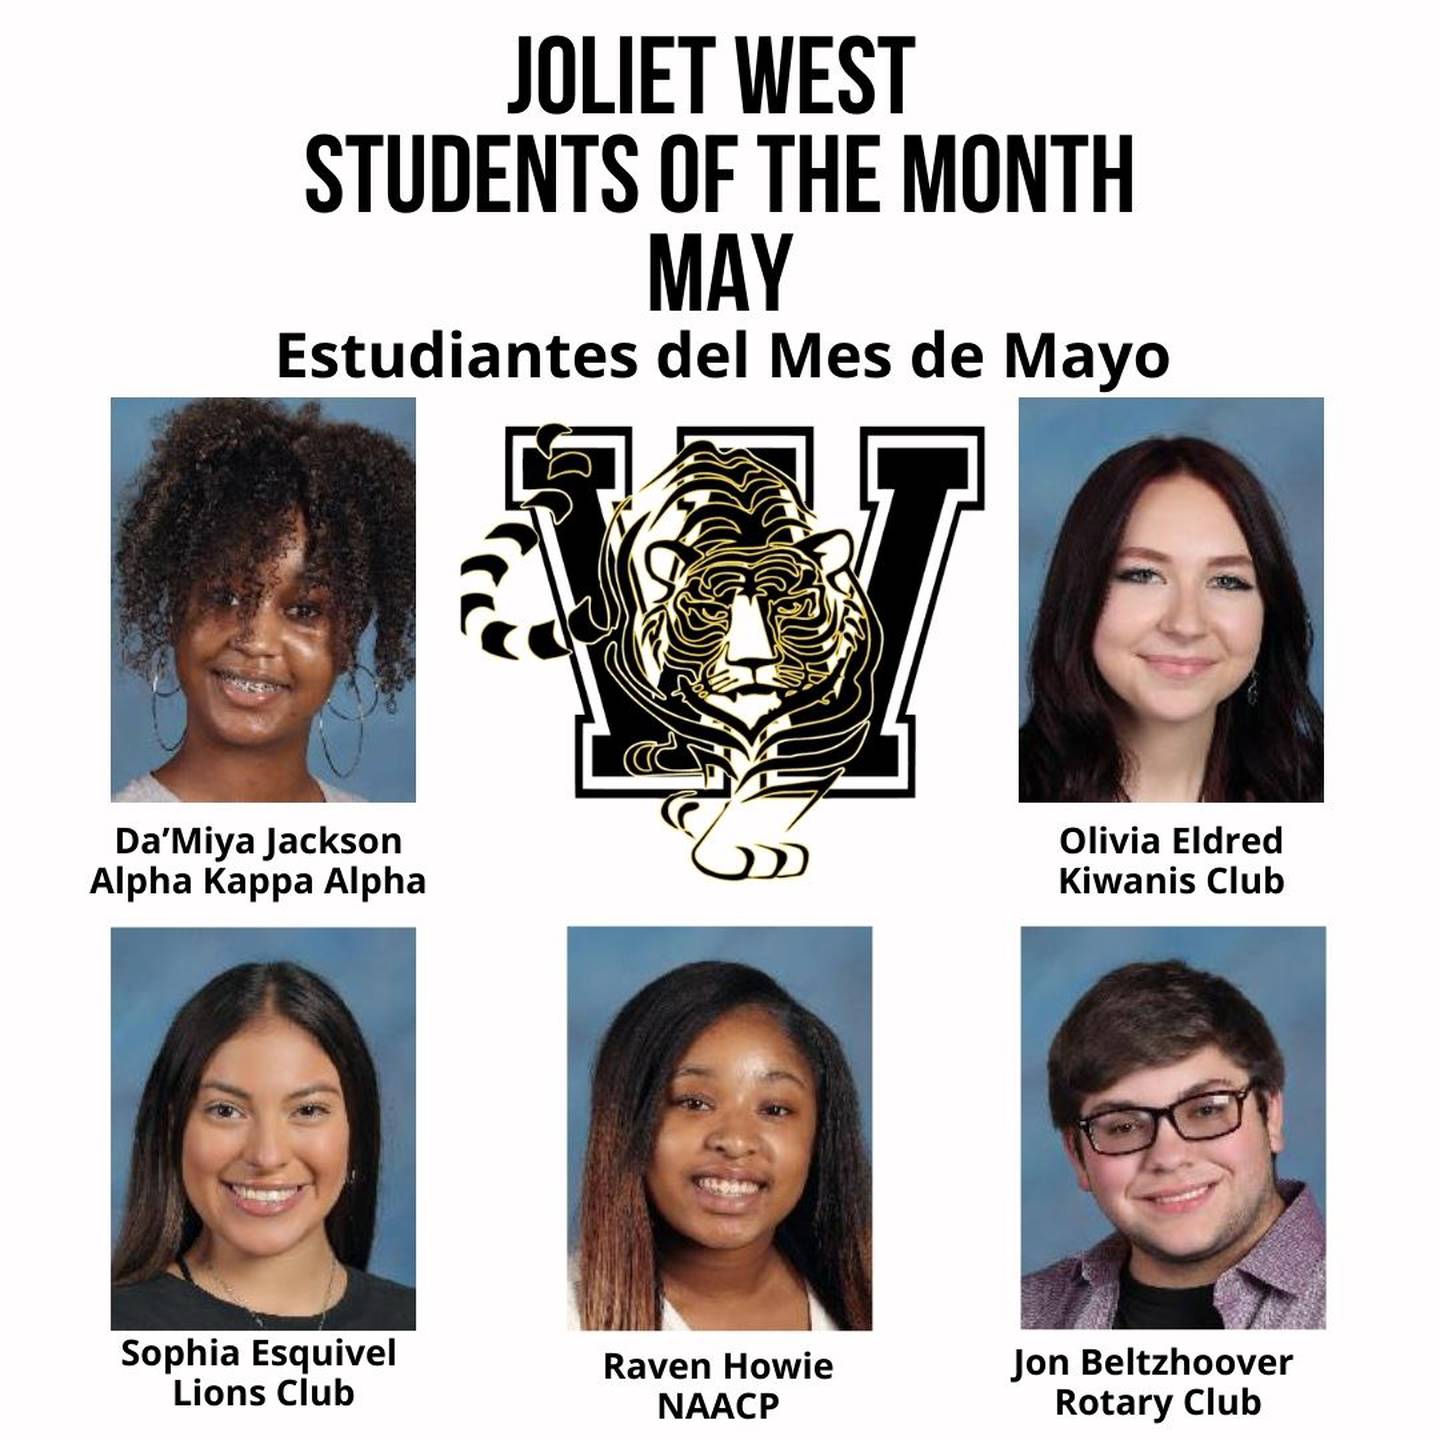 The Joliet West High School Students of the Month for May 2022 are Olivia Eldred, Kiwanis; Sophia Esquivel, Lions; Jon Beltzhoover, Rotary; Raven Howie, NAACP; and Da’Miya Jackson, Alpha Kappa Alpha.